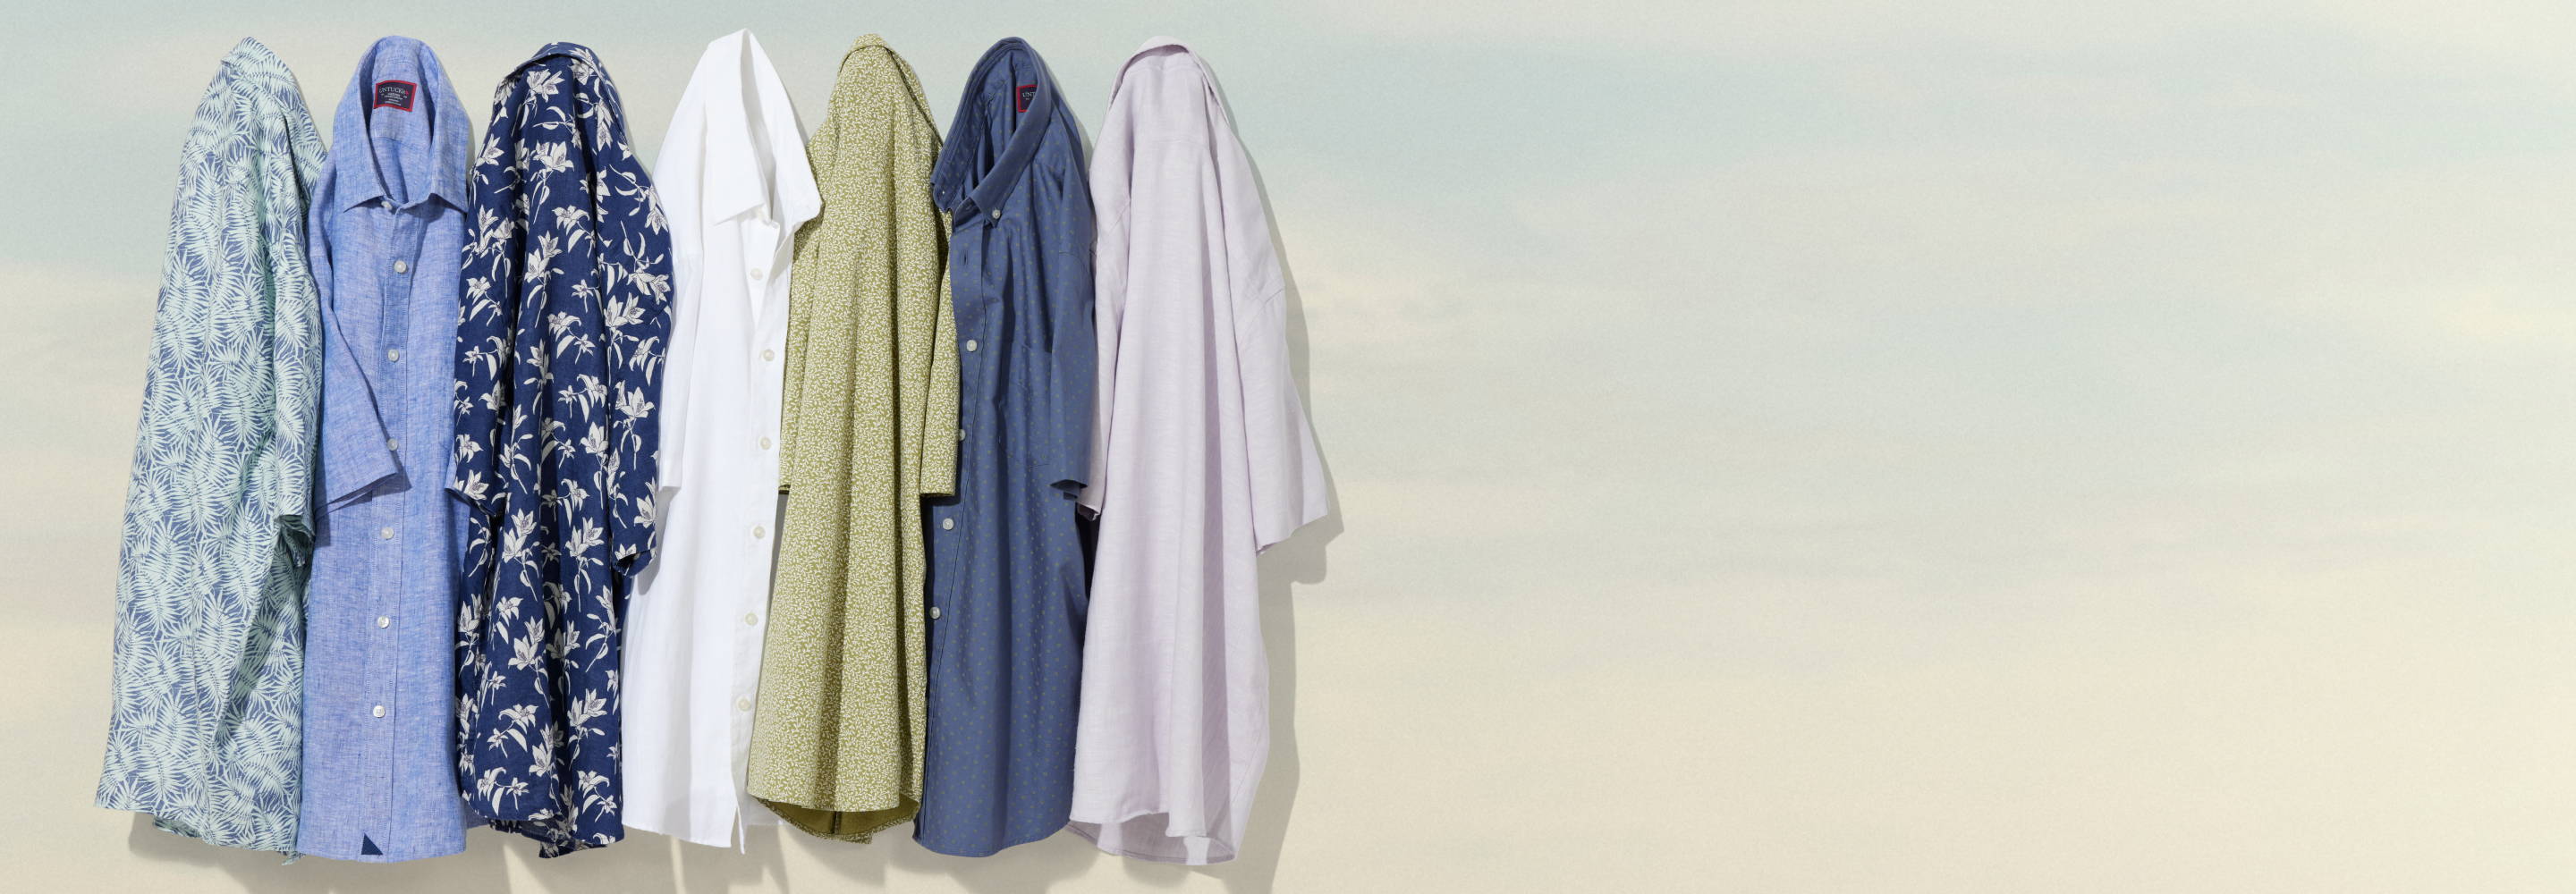 Collection of UNTUCKIt wrinkle-resistant linen shirts.